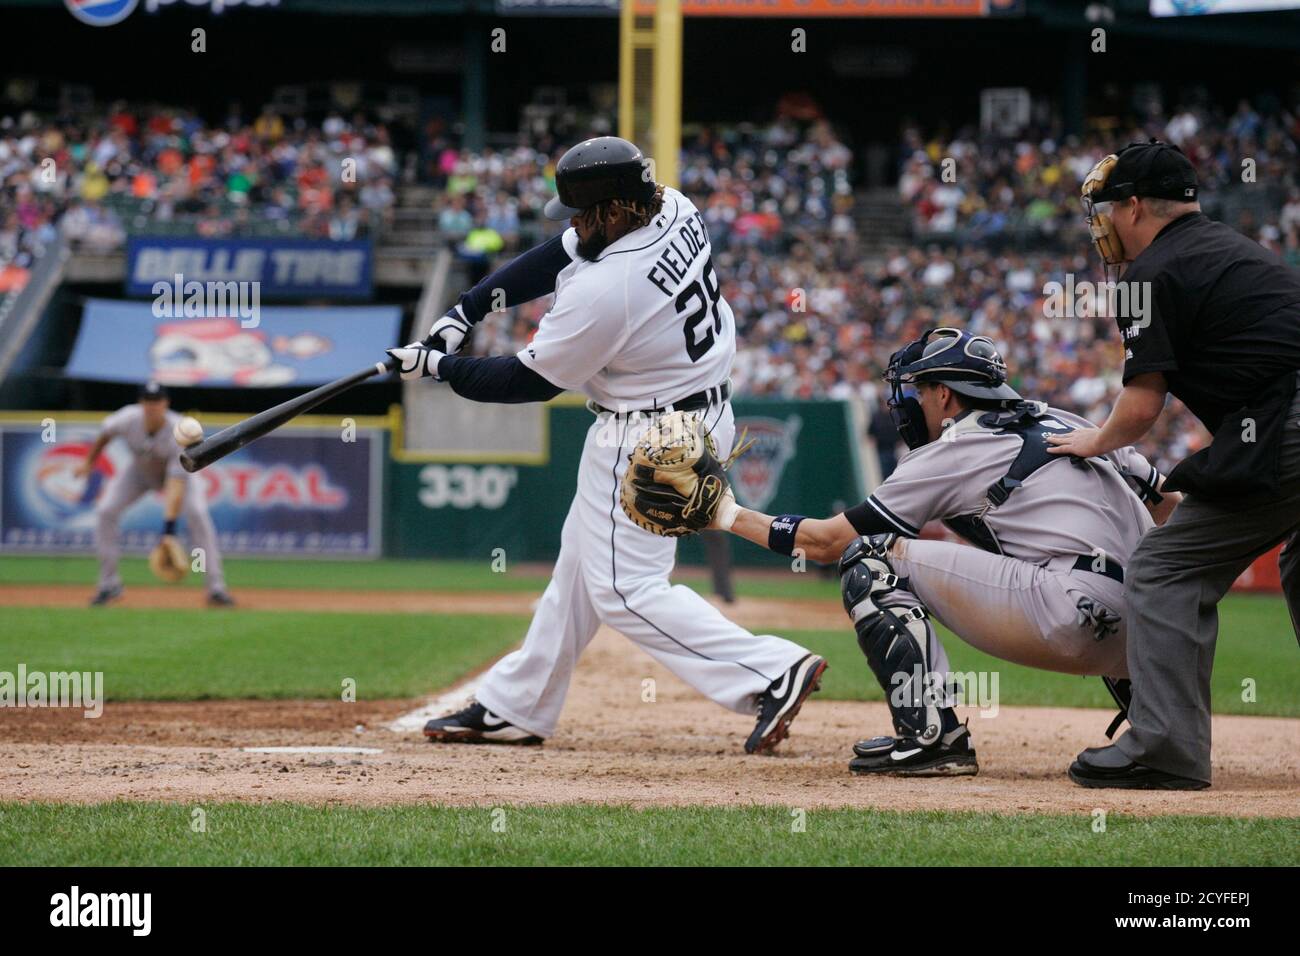 Detroit Tigers' Prince Fielder pops out to New York Yankees' Eric Chavez  during the fourth inning of their MLB American League baseball game in Detroit,  Michigan August 9, 2012.  REUTERS/Rebecca Cook  (UNITED STATES - Tags: SPORT BASEBALL) Stock Photo